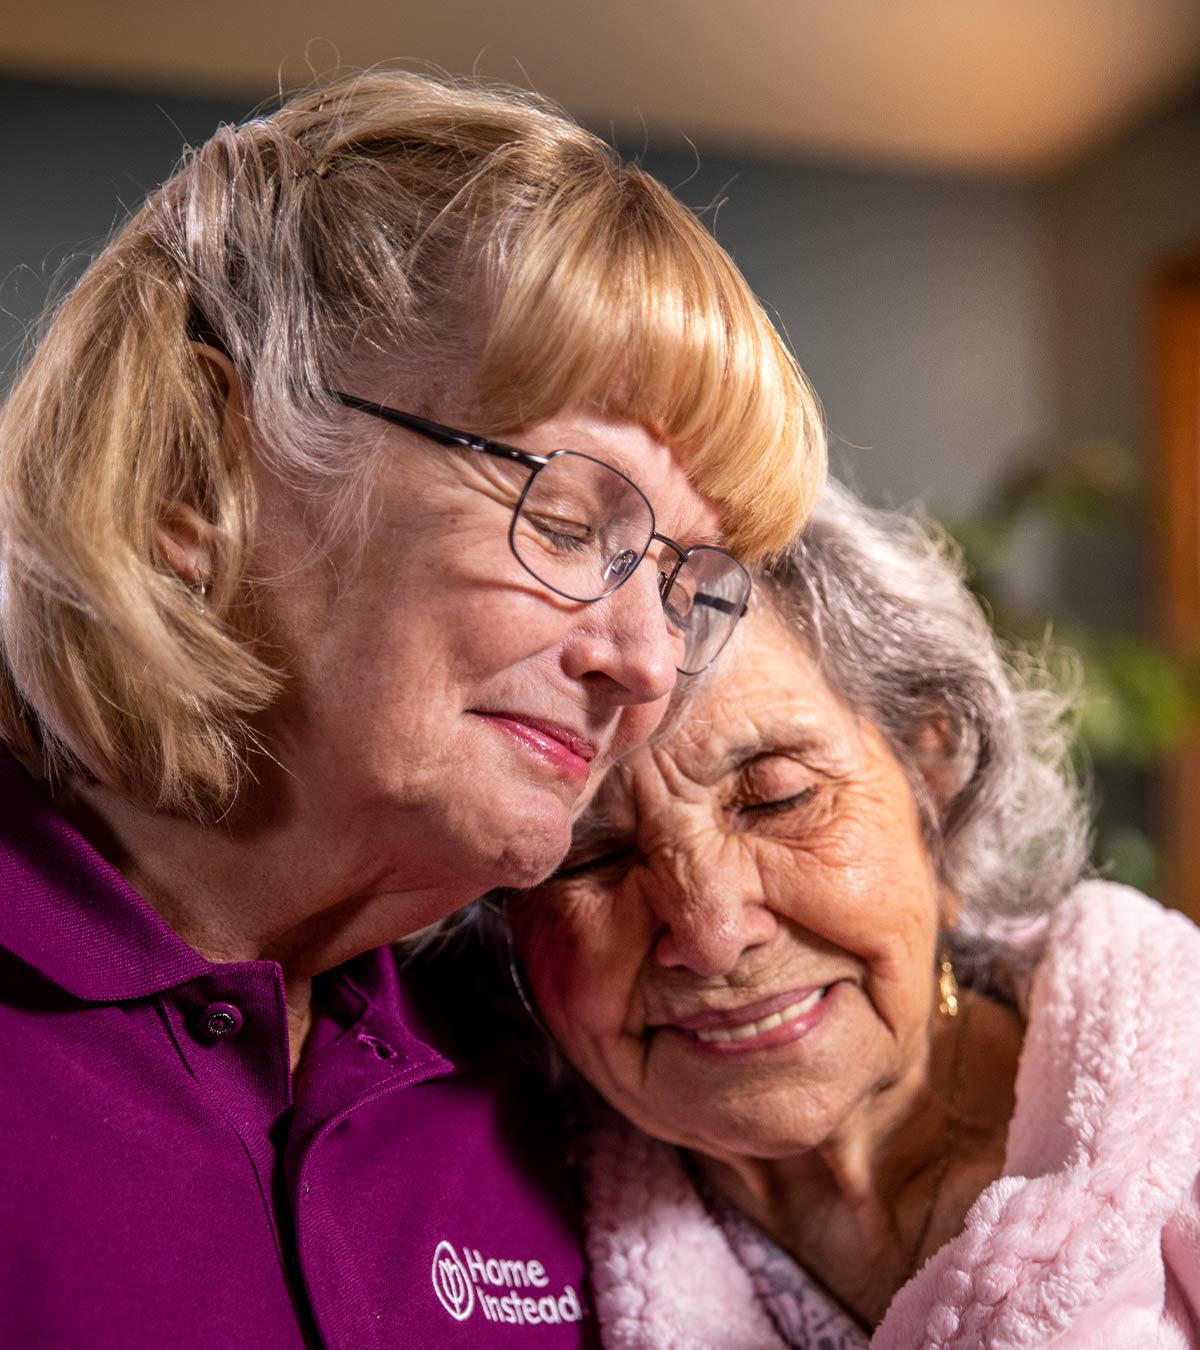 CAREGiver providing in-home senior care services. Home Instead of Goodlettsville, TN provides Elder Care to aging adults. 